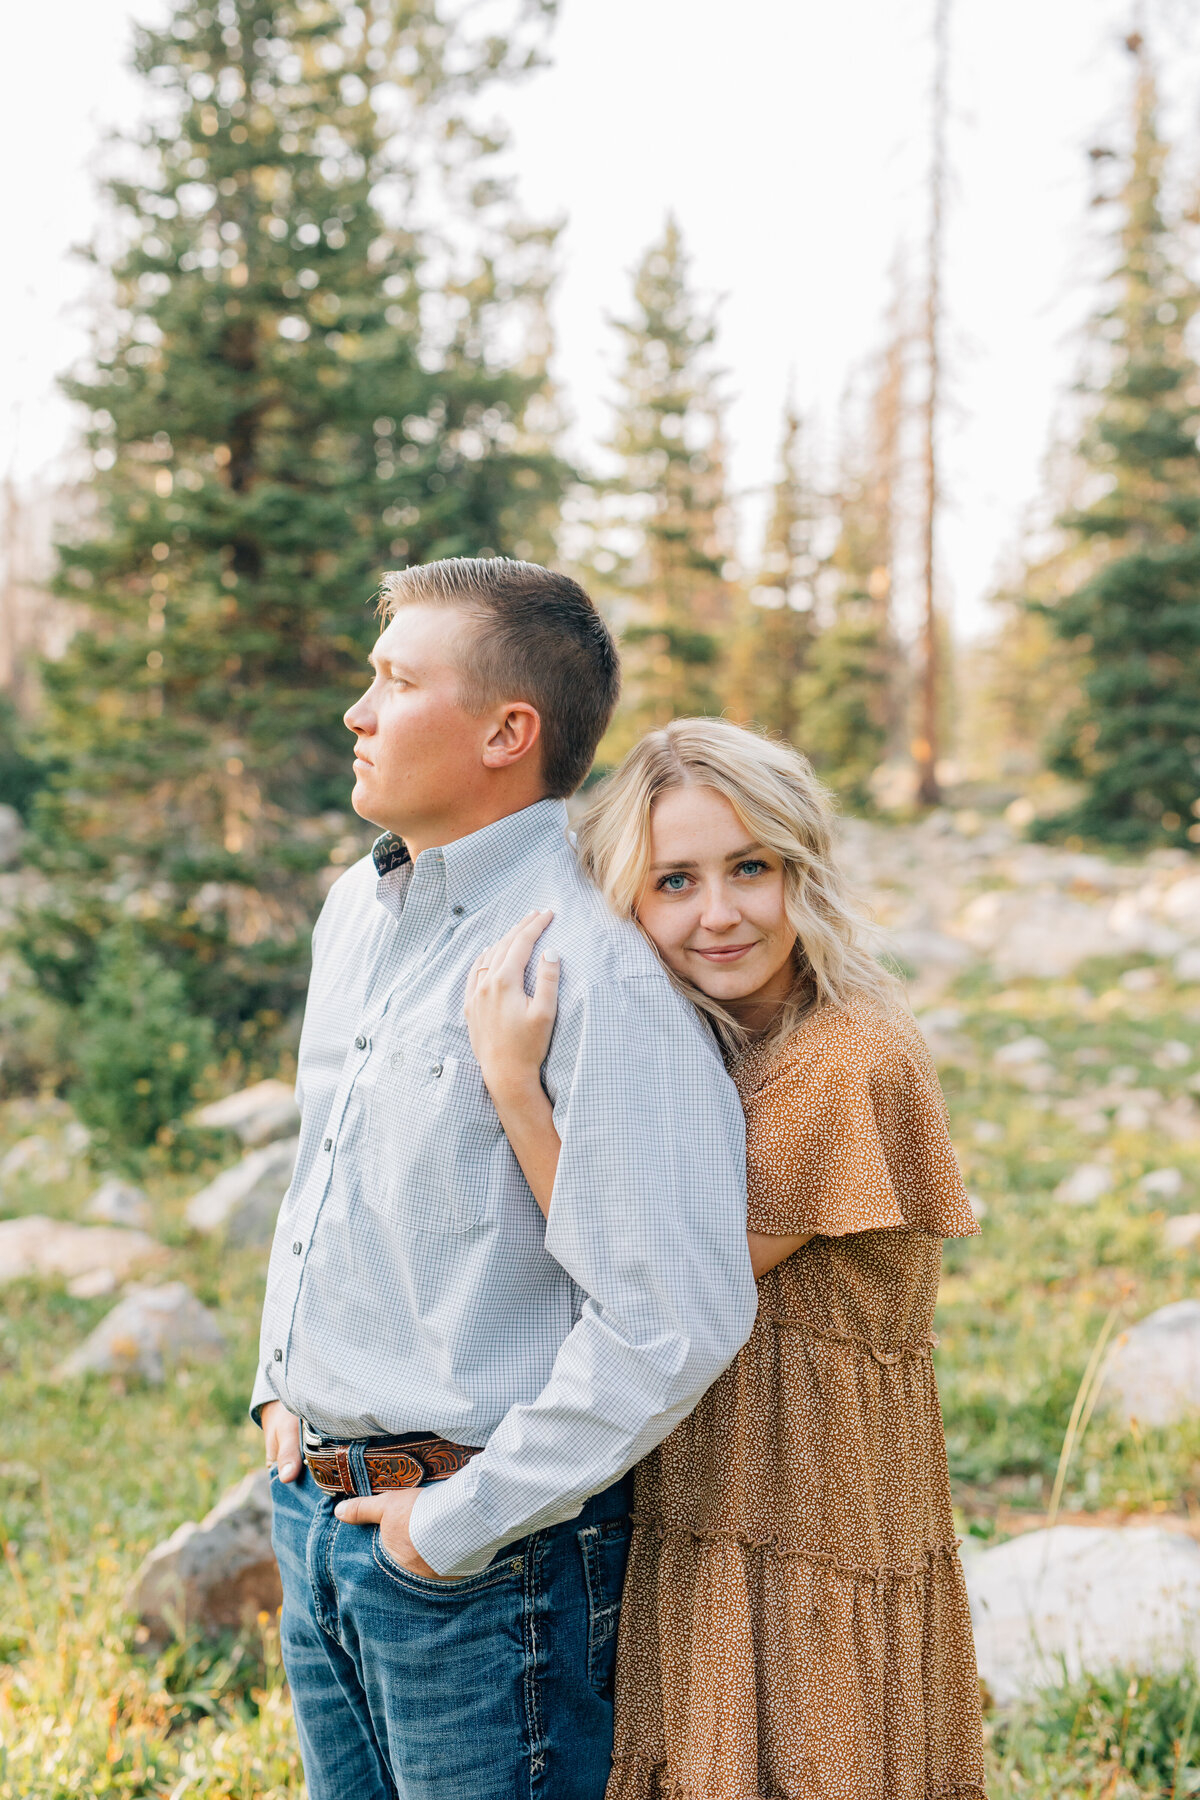 Summer engagement photos in the mountains